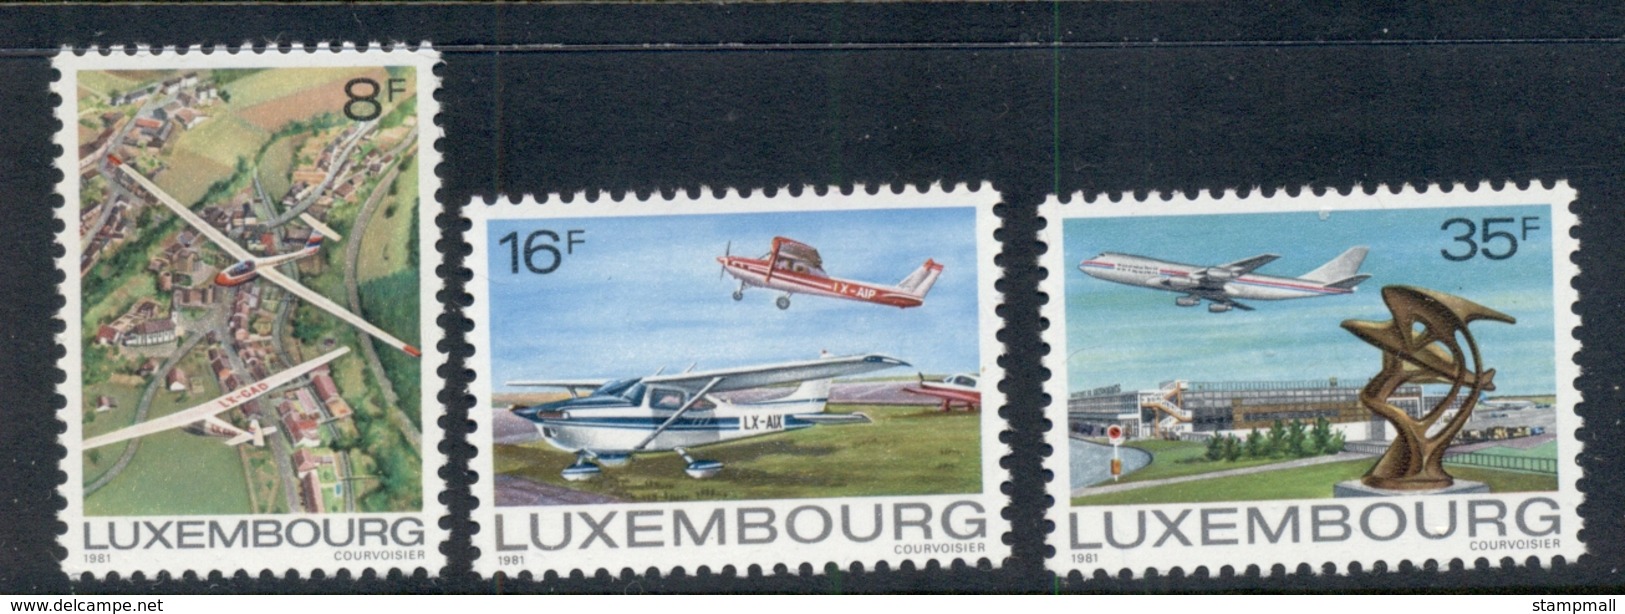 Luxembourg 1981 Gliding MUH - Unused Stamps